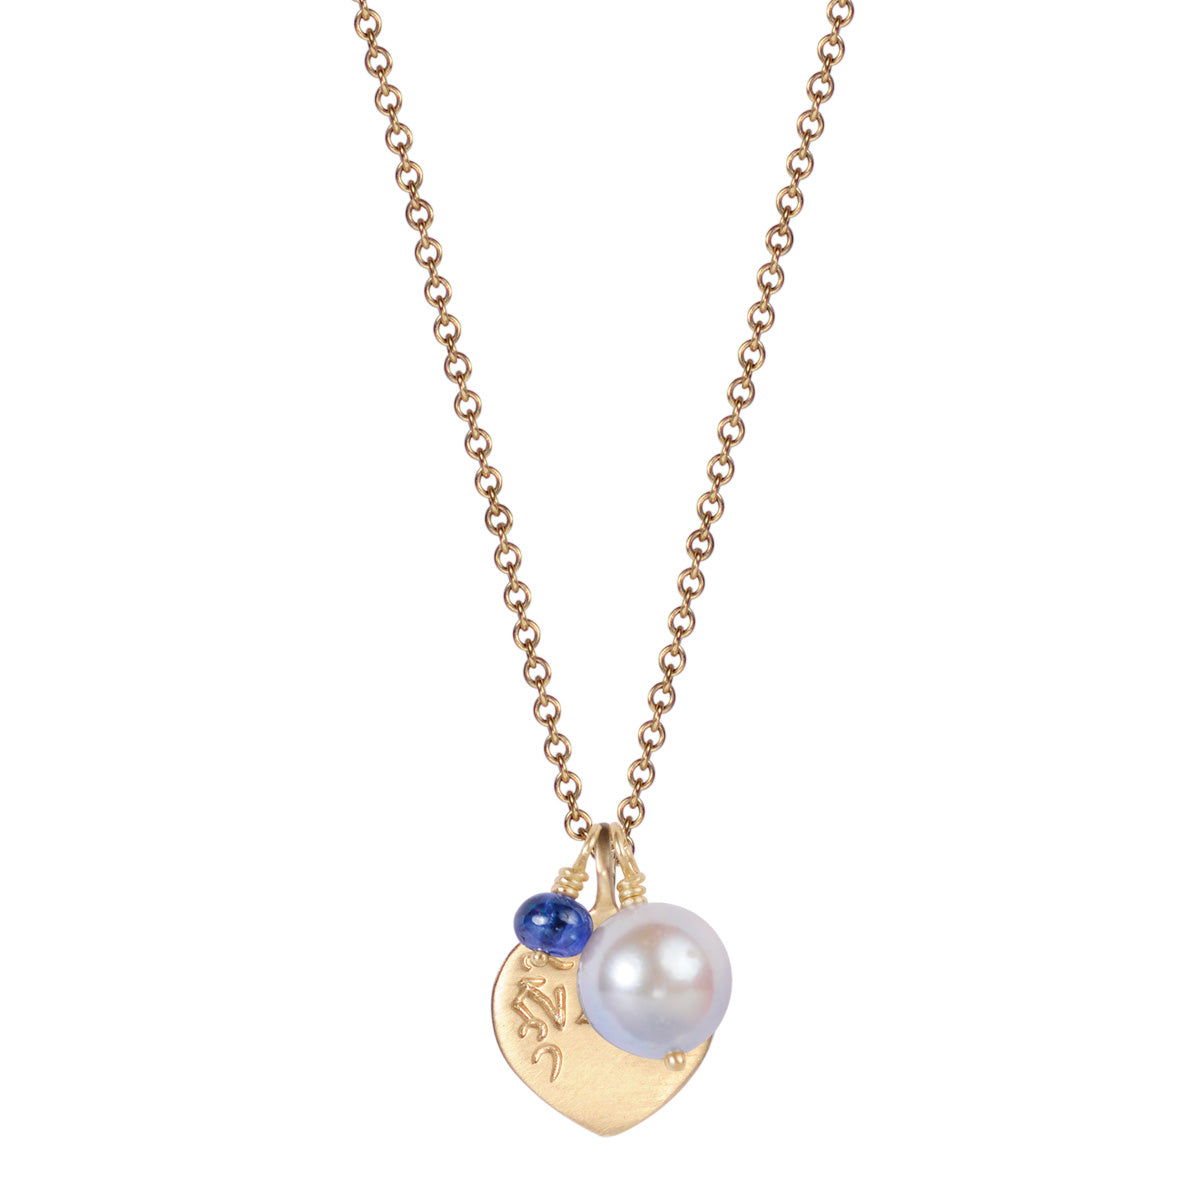 10K Gold Compassion Trinket Pendant with Akoya Pearl and Sapphire